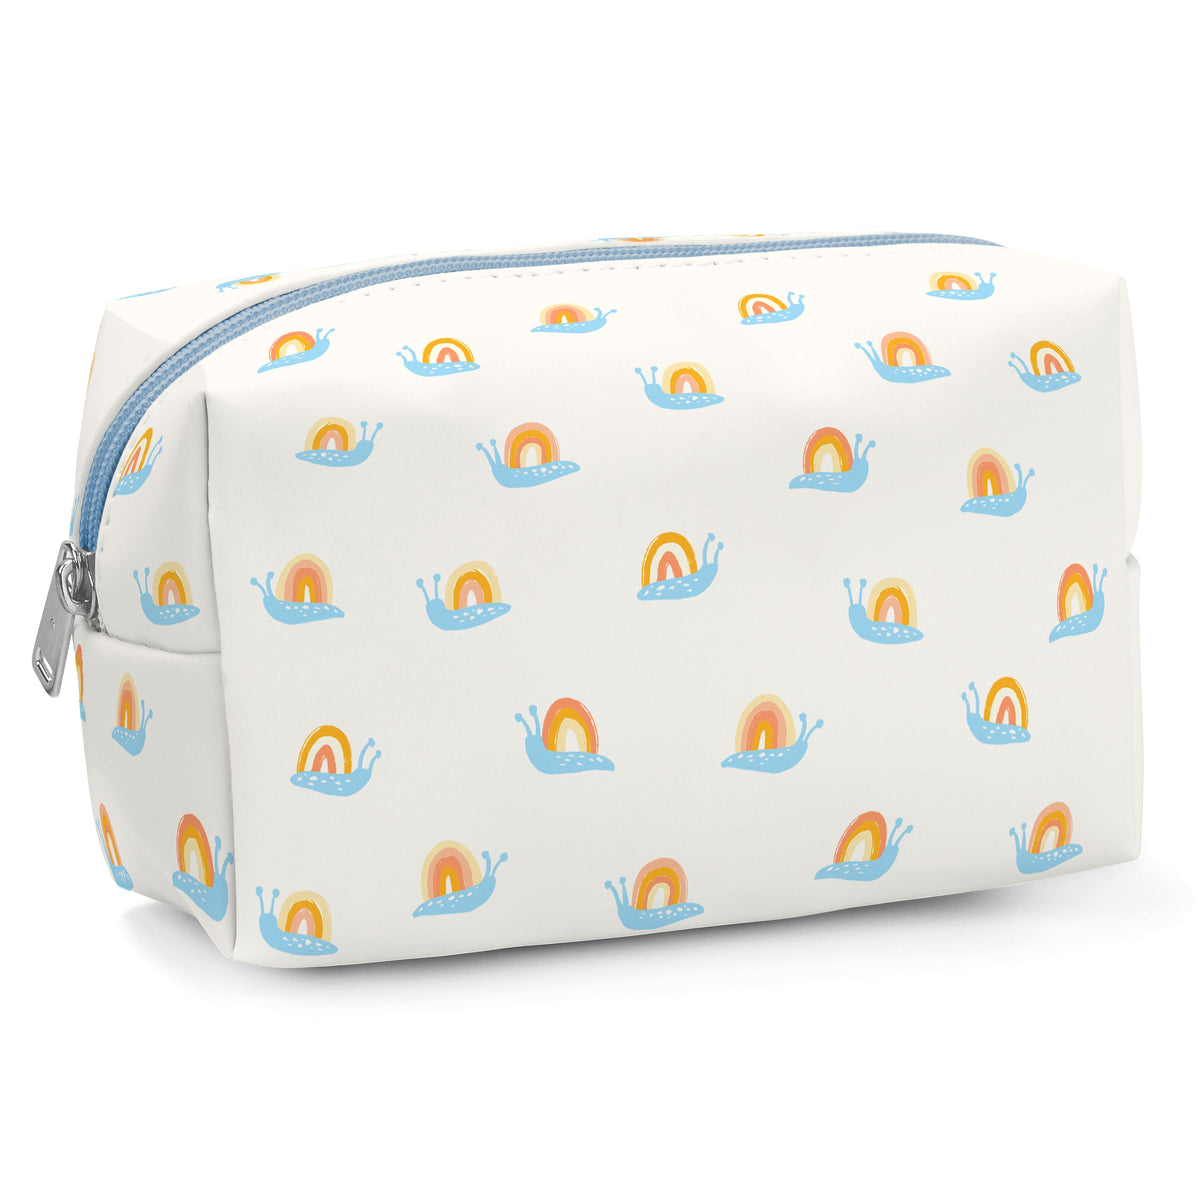 Rainbow Snails Loaf Cosmetic Bag